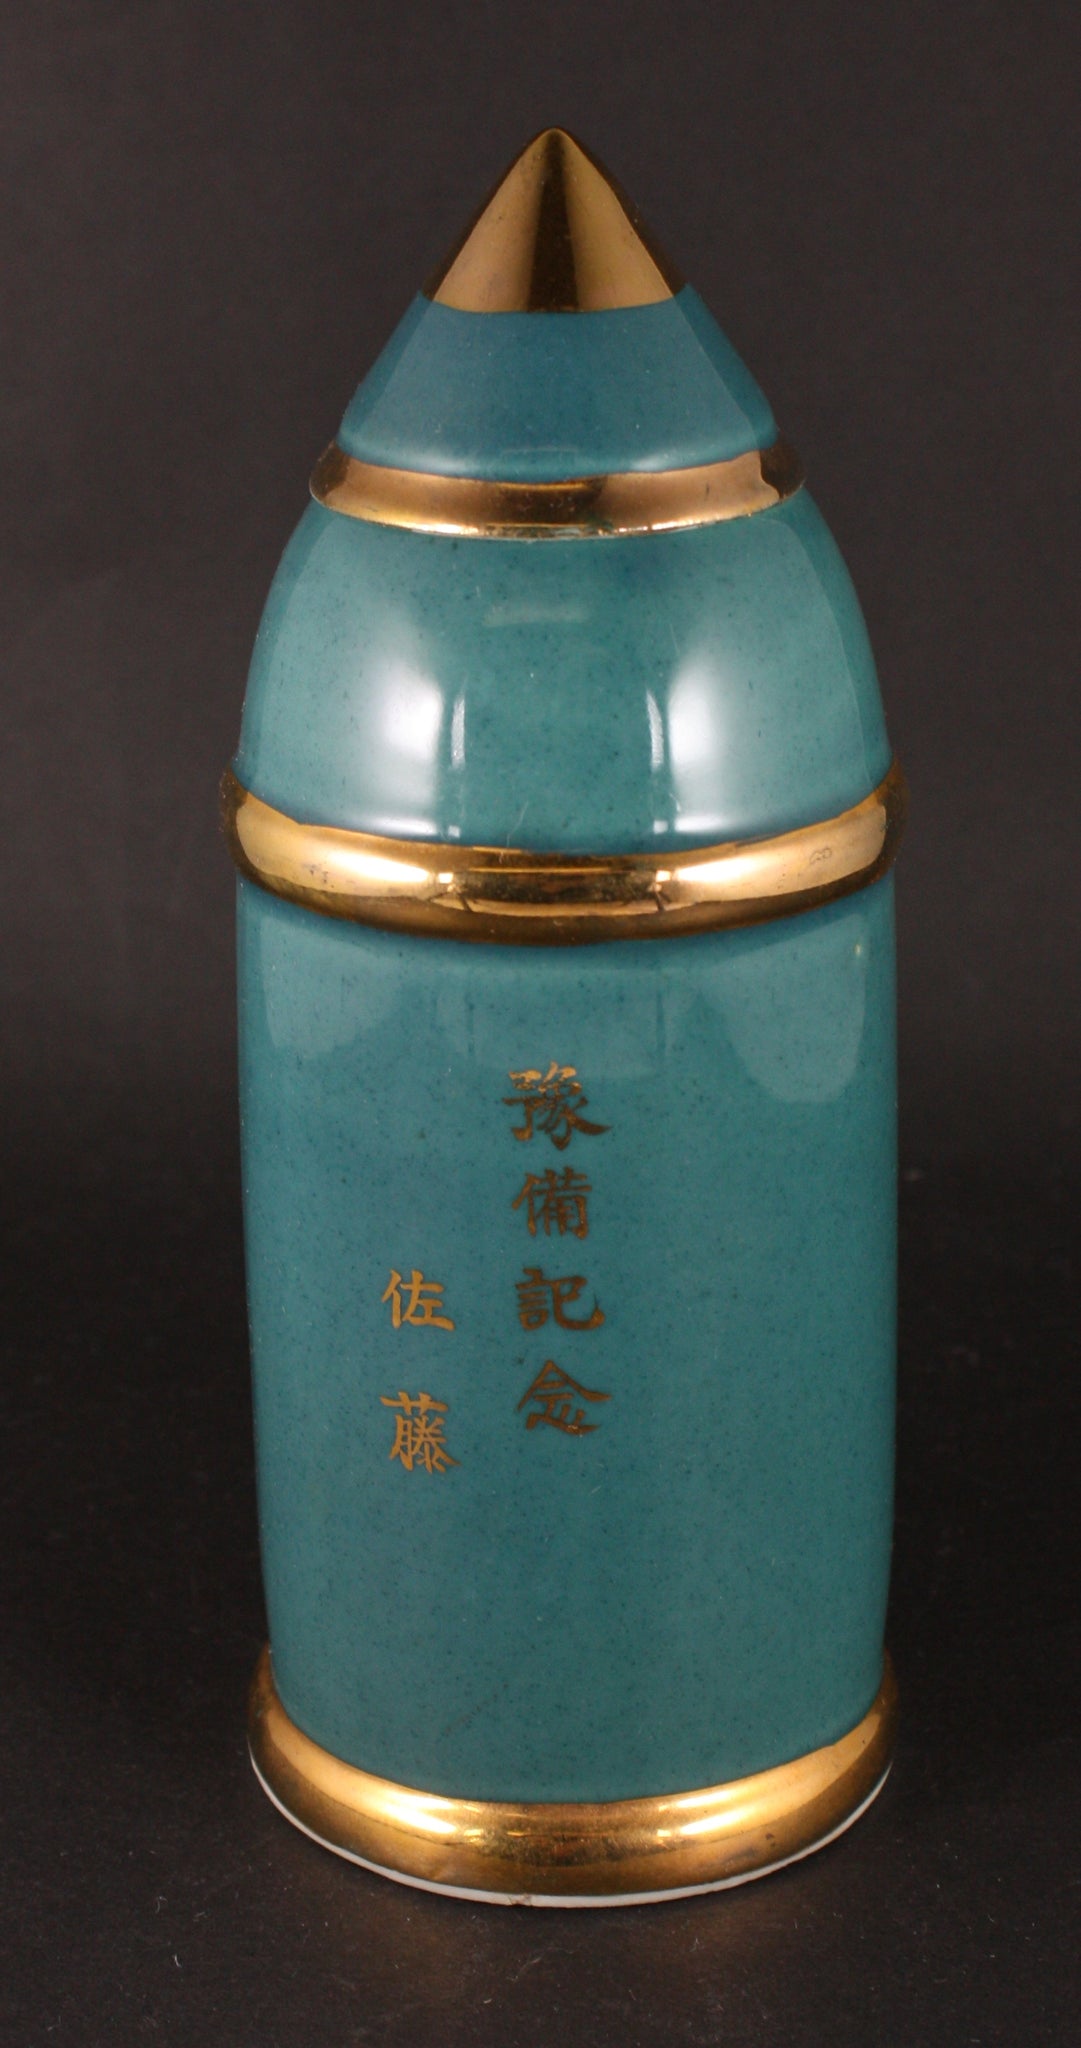 Rare Antique Japanese Military Shell Shaped Artillery Army Sake Bottle with Box